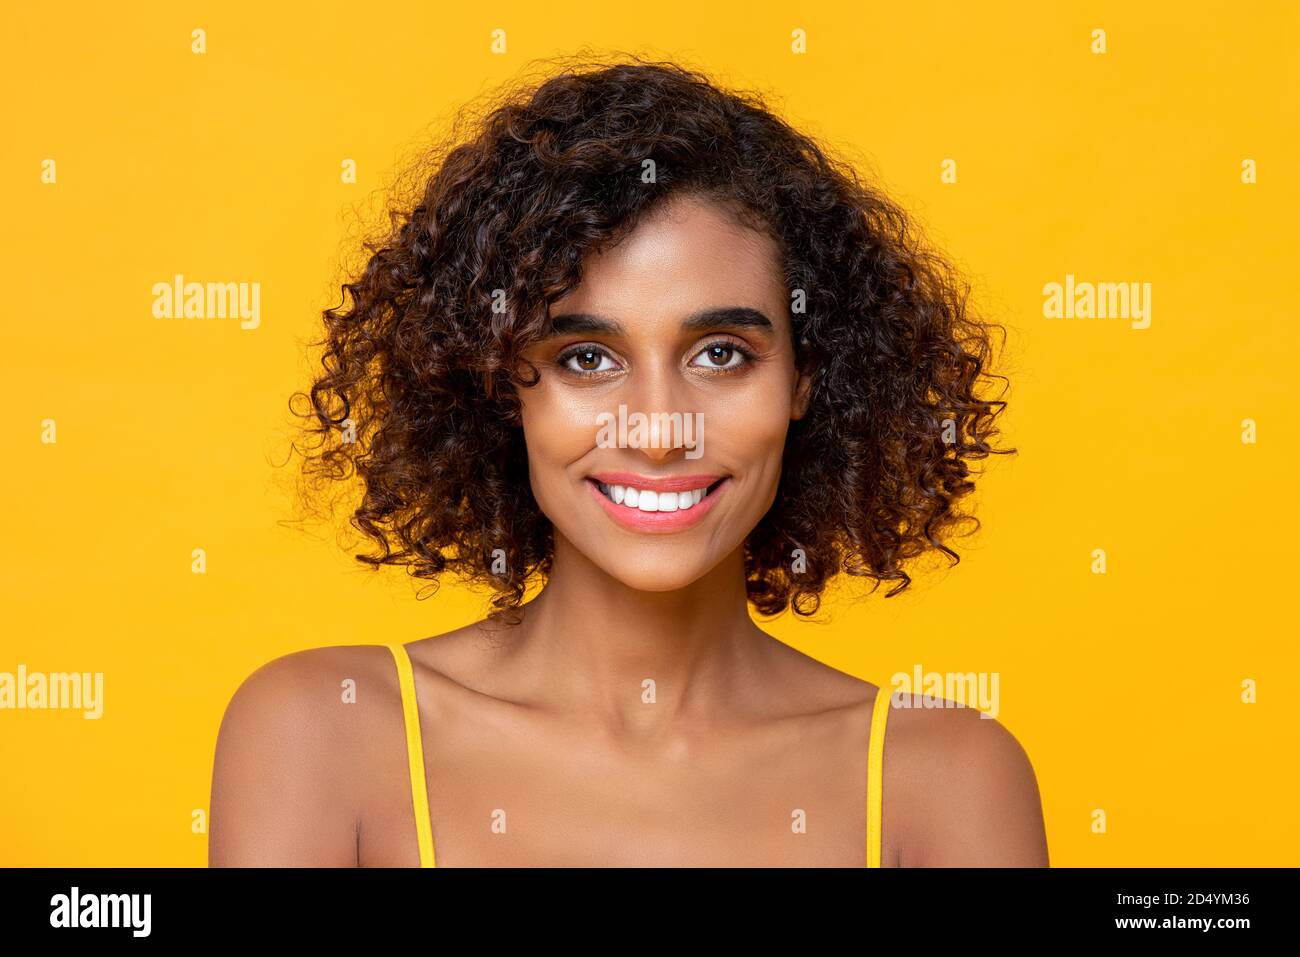 Happy smiling beautiful African American woman looking at camera isolated on colorful yellow background Stock Photo